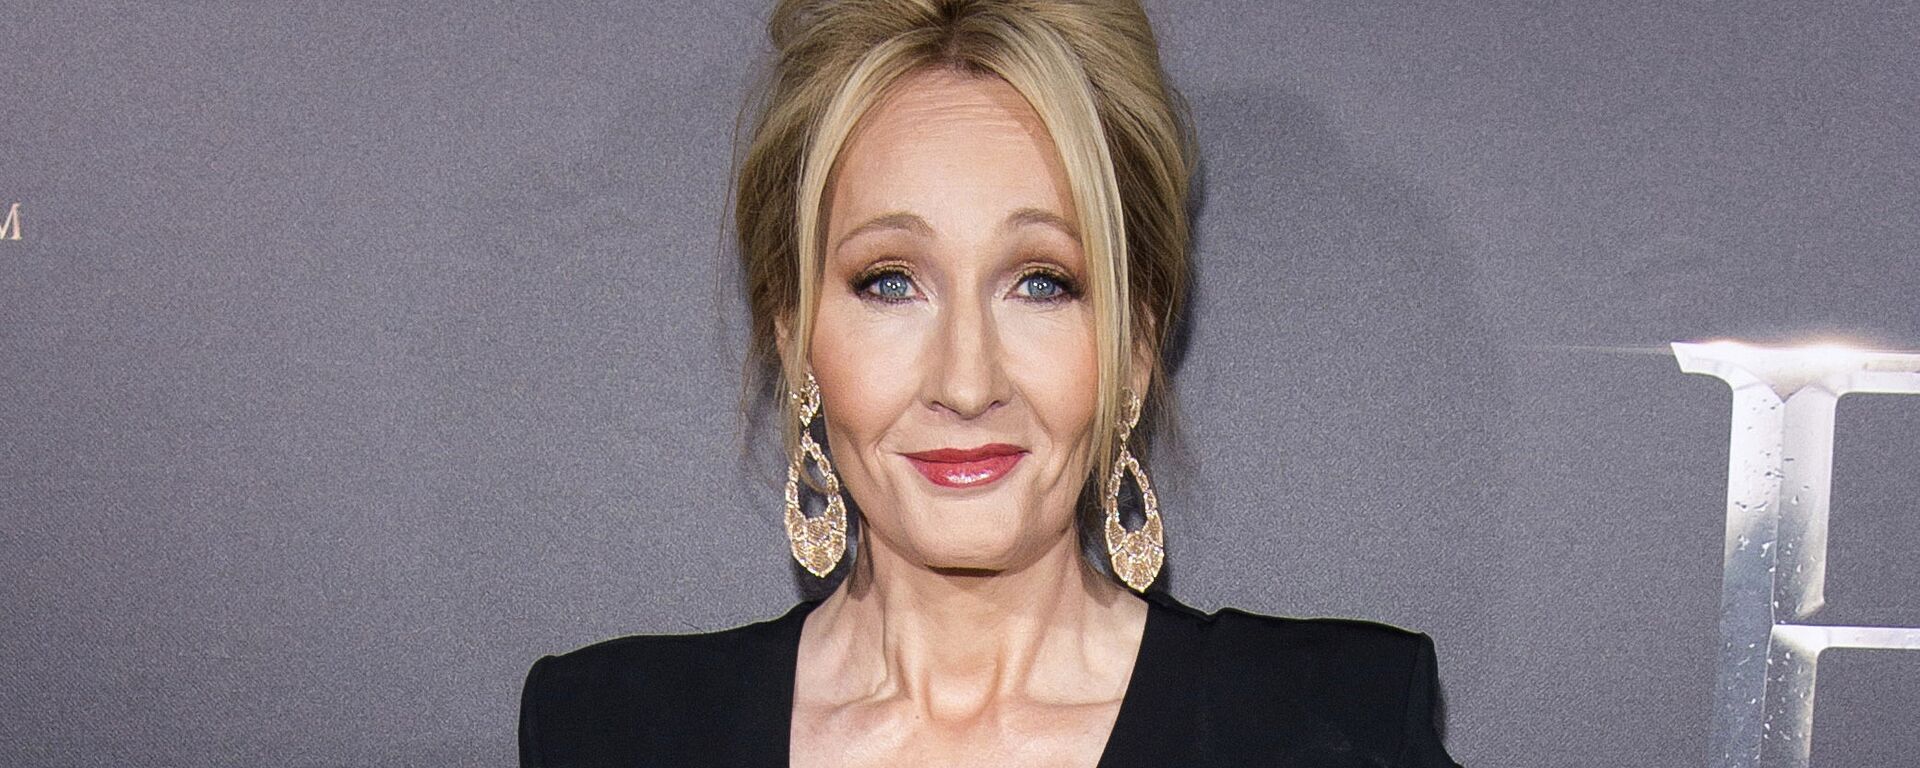 In this Nov. 10, 2016 file photo, J. K. Rowling attends the world premiere of Fantastic Beasts and Where To Find Them in New York.  - Sputnik International, 1920, 29.12.2021